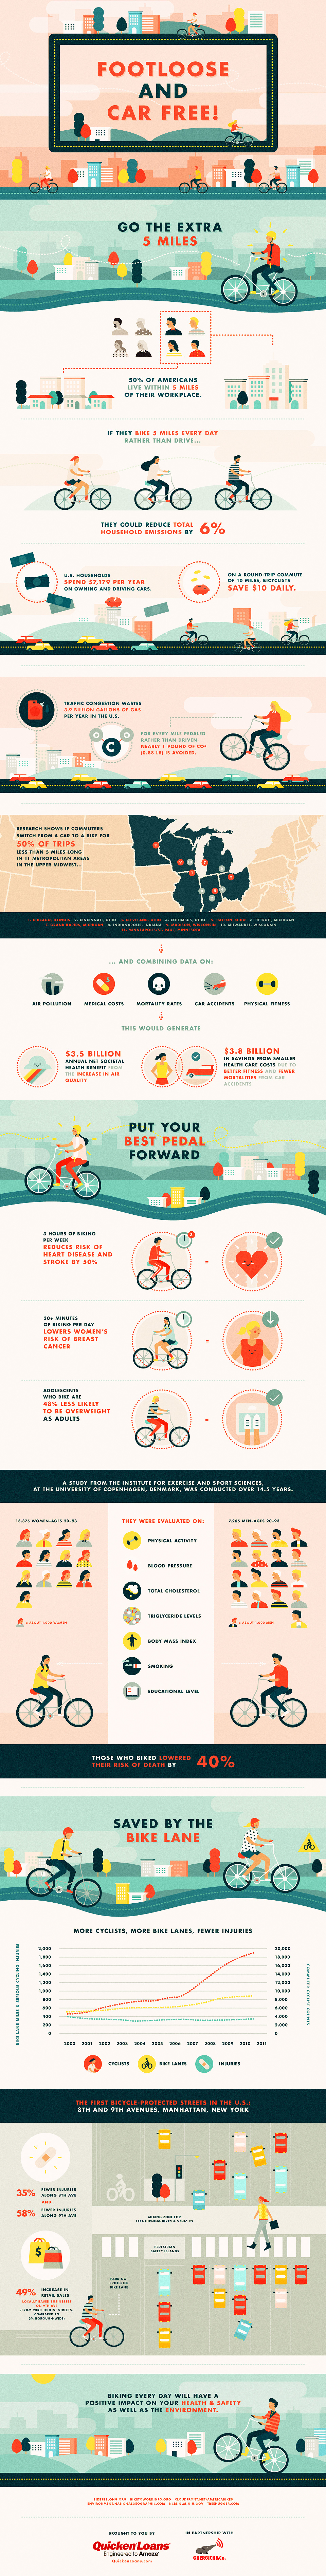 Footloose and Car Free! How Biking Can Improve Your Health and the Environment